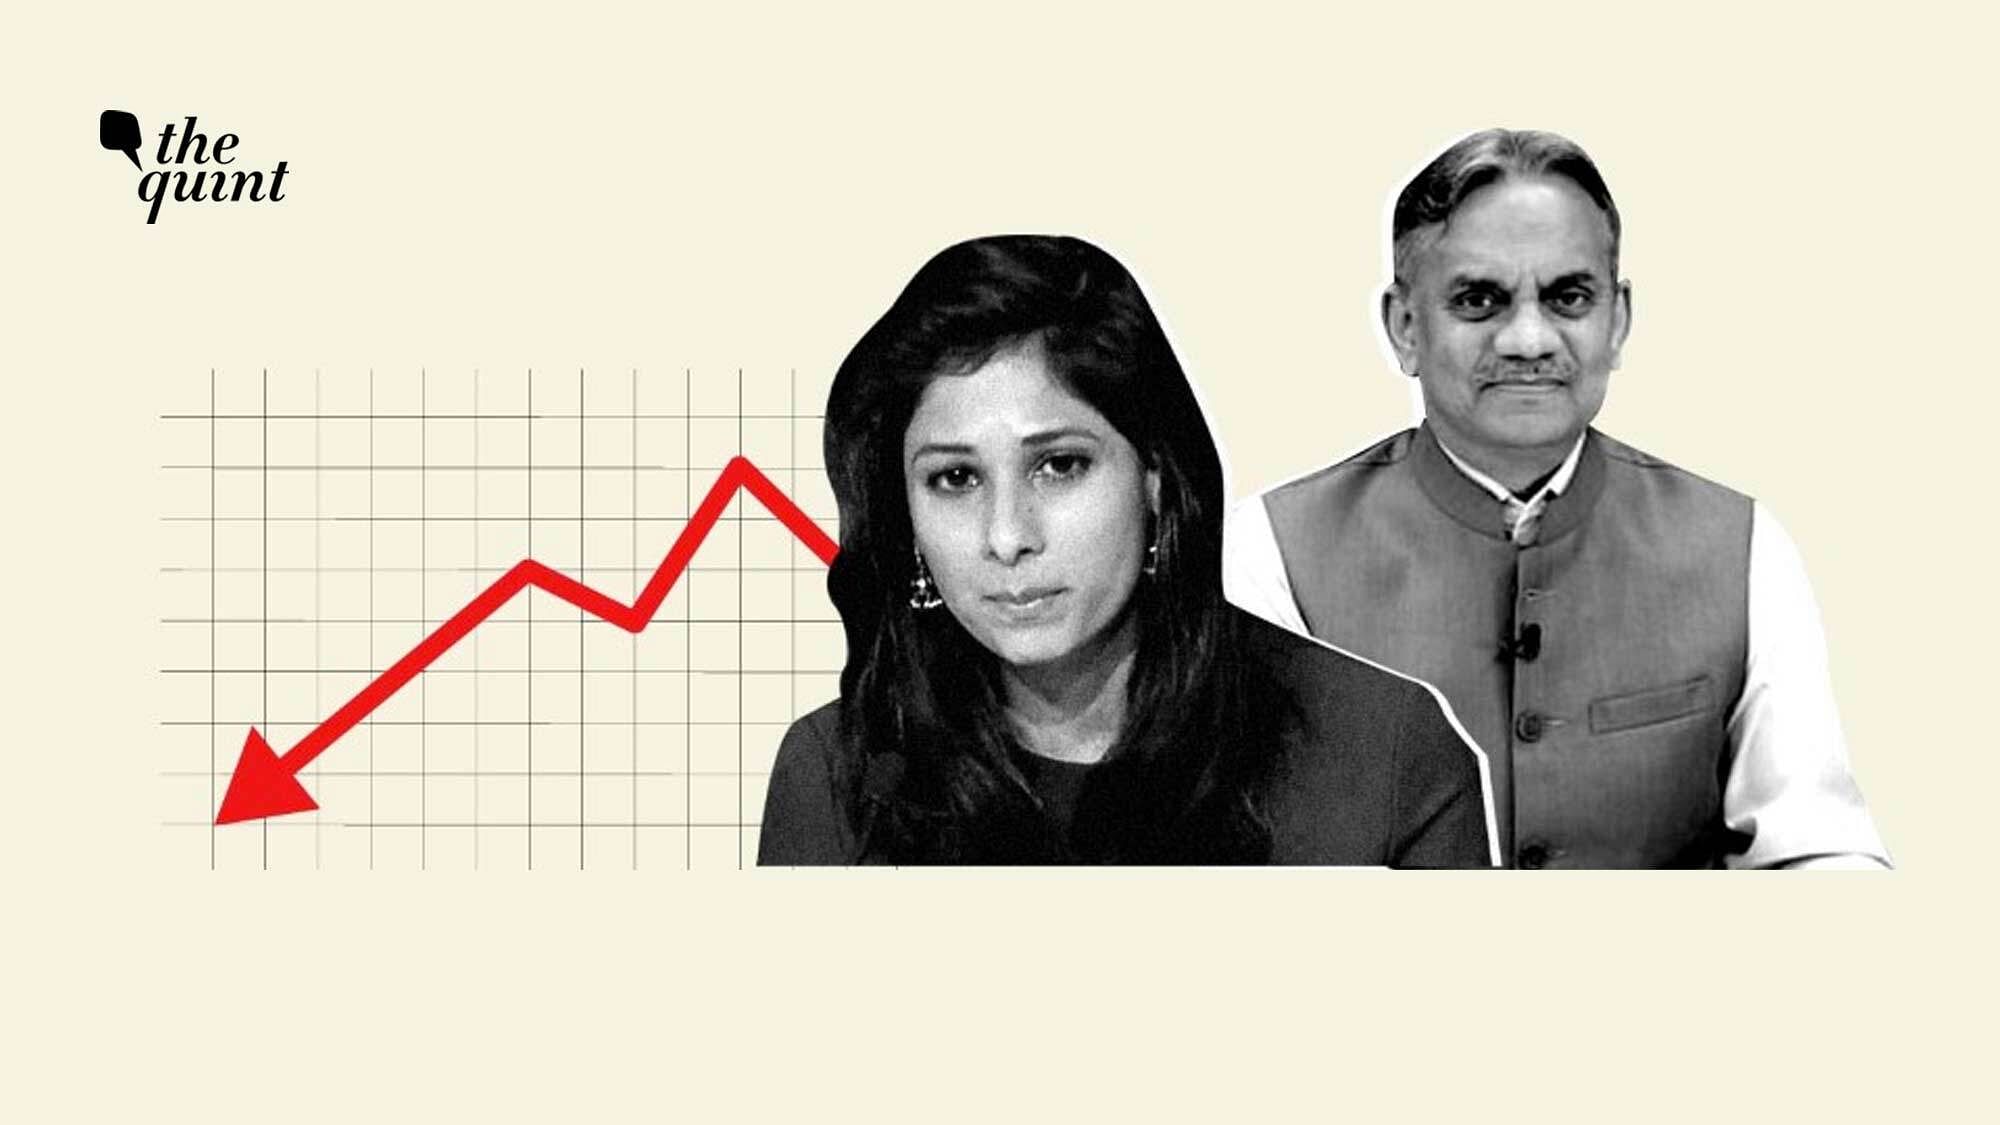 The Quint’s Editorial Director Sanjay Pugalia speaks to IMF’s chief economist Gita Gopinath on what India needs to do about the economy now.